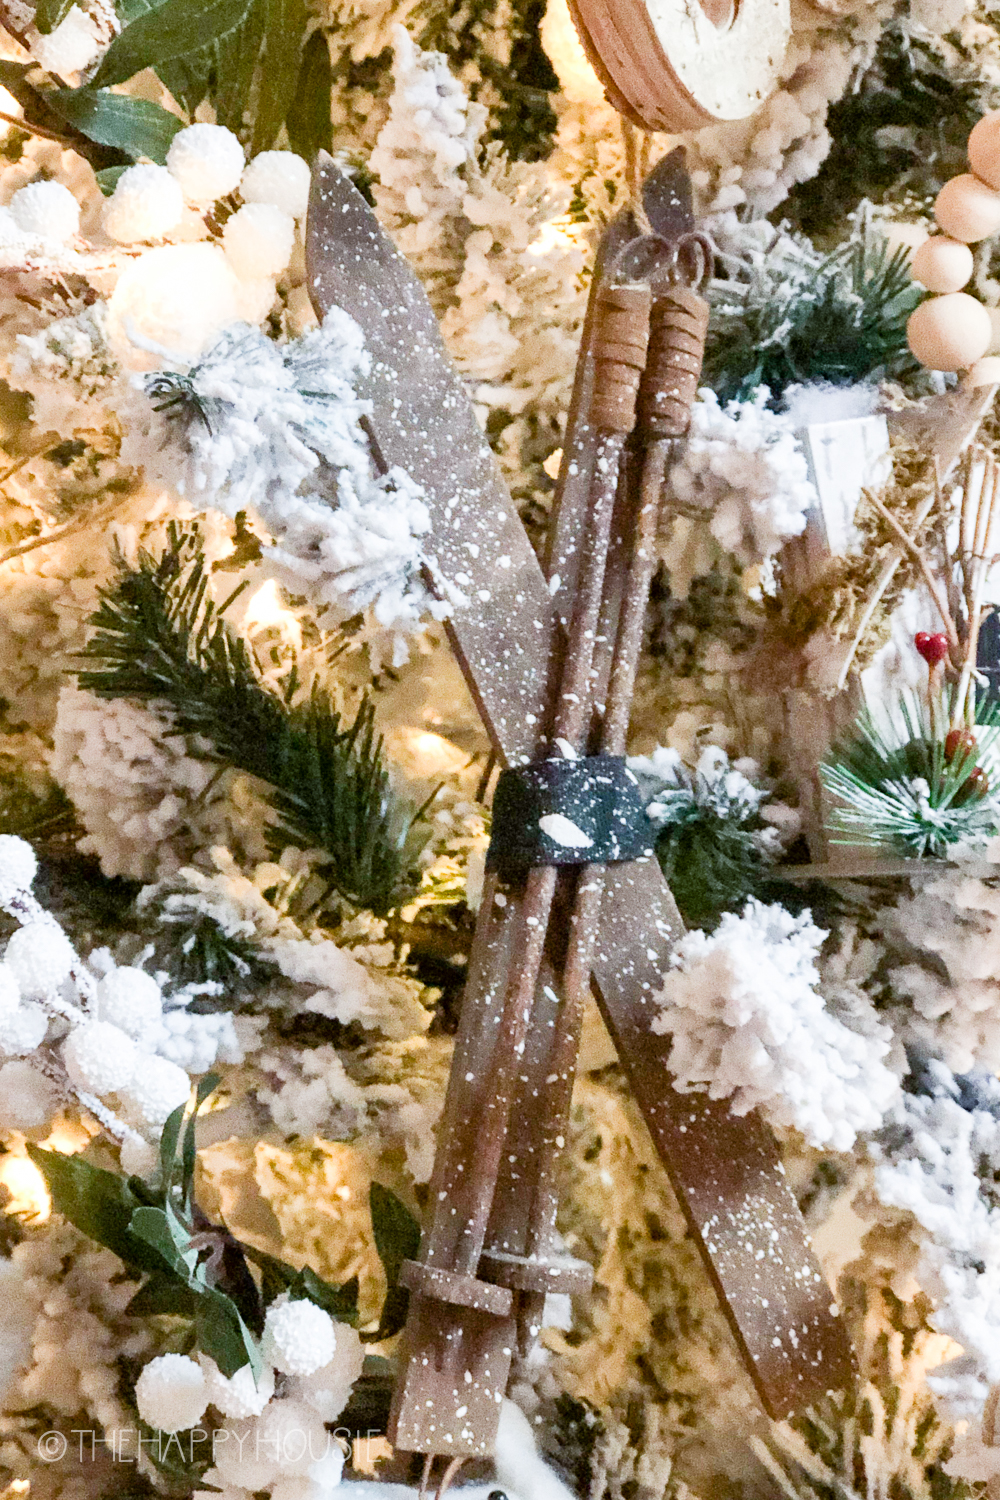 A pair of small wooden skis is hanging on the tree.